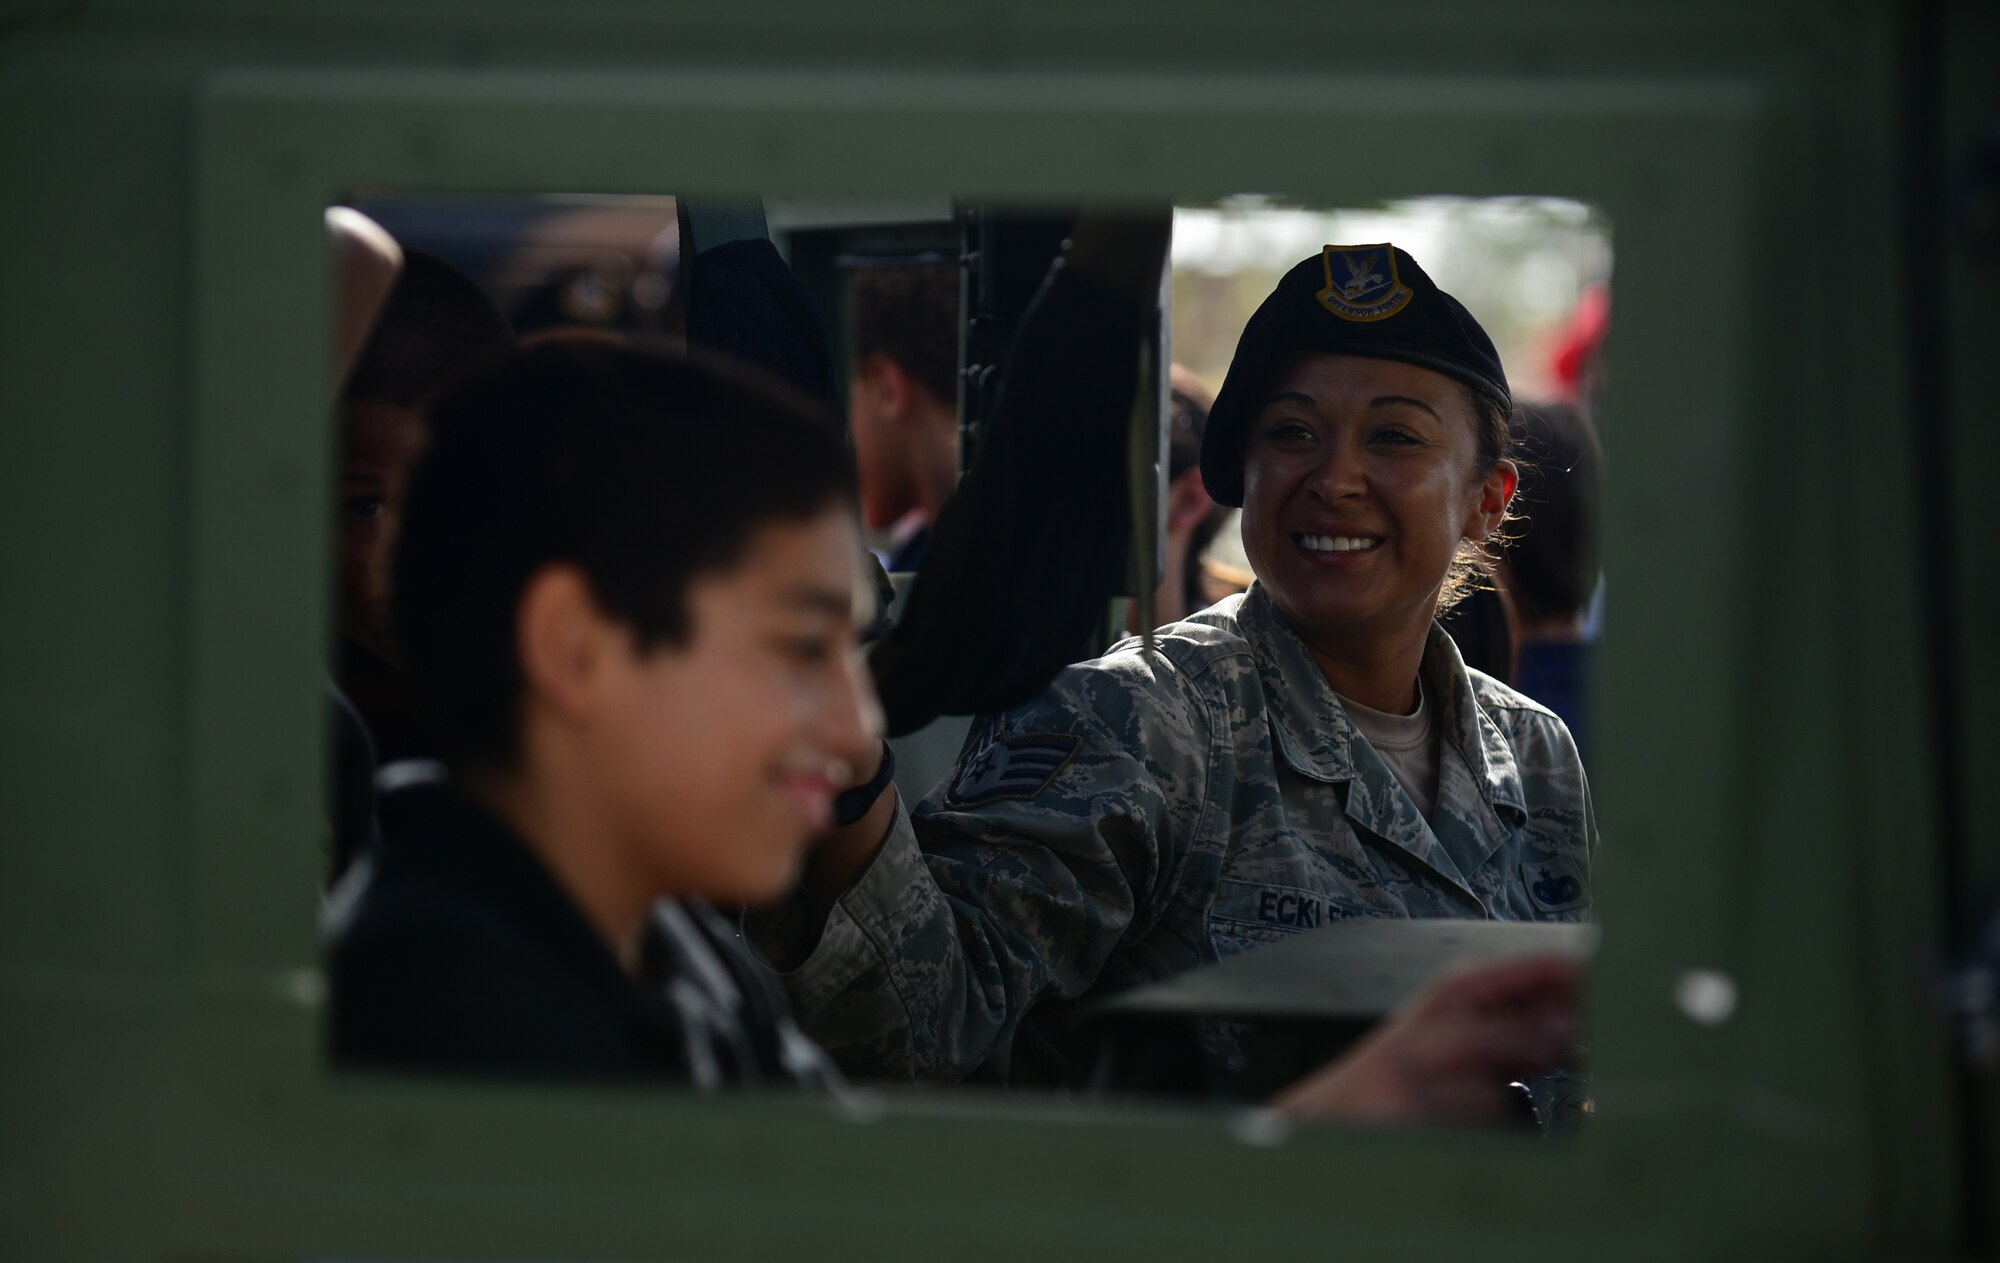 Staff Sgt. Patricia Eckles, 736th Security Forces Squadron Commando Warrior kennel master, interacts with students May 17, 2016, at Andersen Air Force Base, Guam. Airmen from the 36th Security Forces Squadron, 736th SFS and Air Force Office of Special Investigations Det. 602 displayed their gear and skillsets to Andersen students during Police Week. (U.S. Air Force photo by Senior Airman Joshua Smoot)